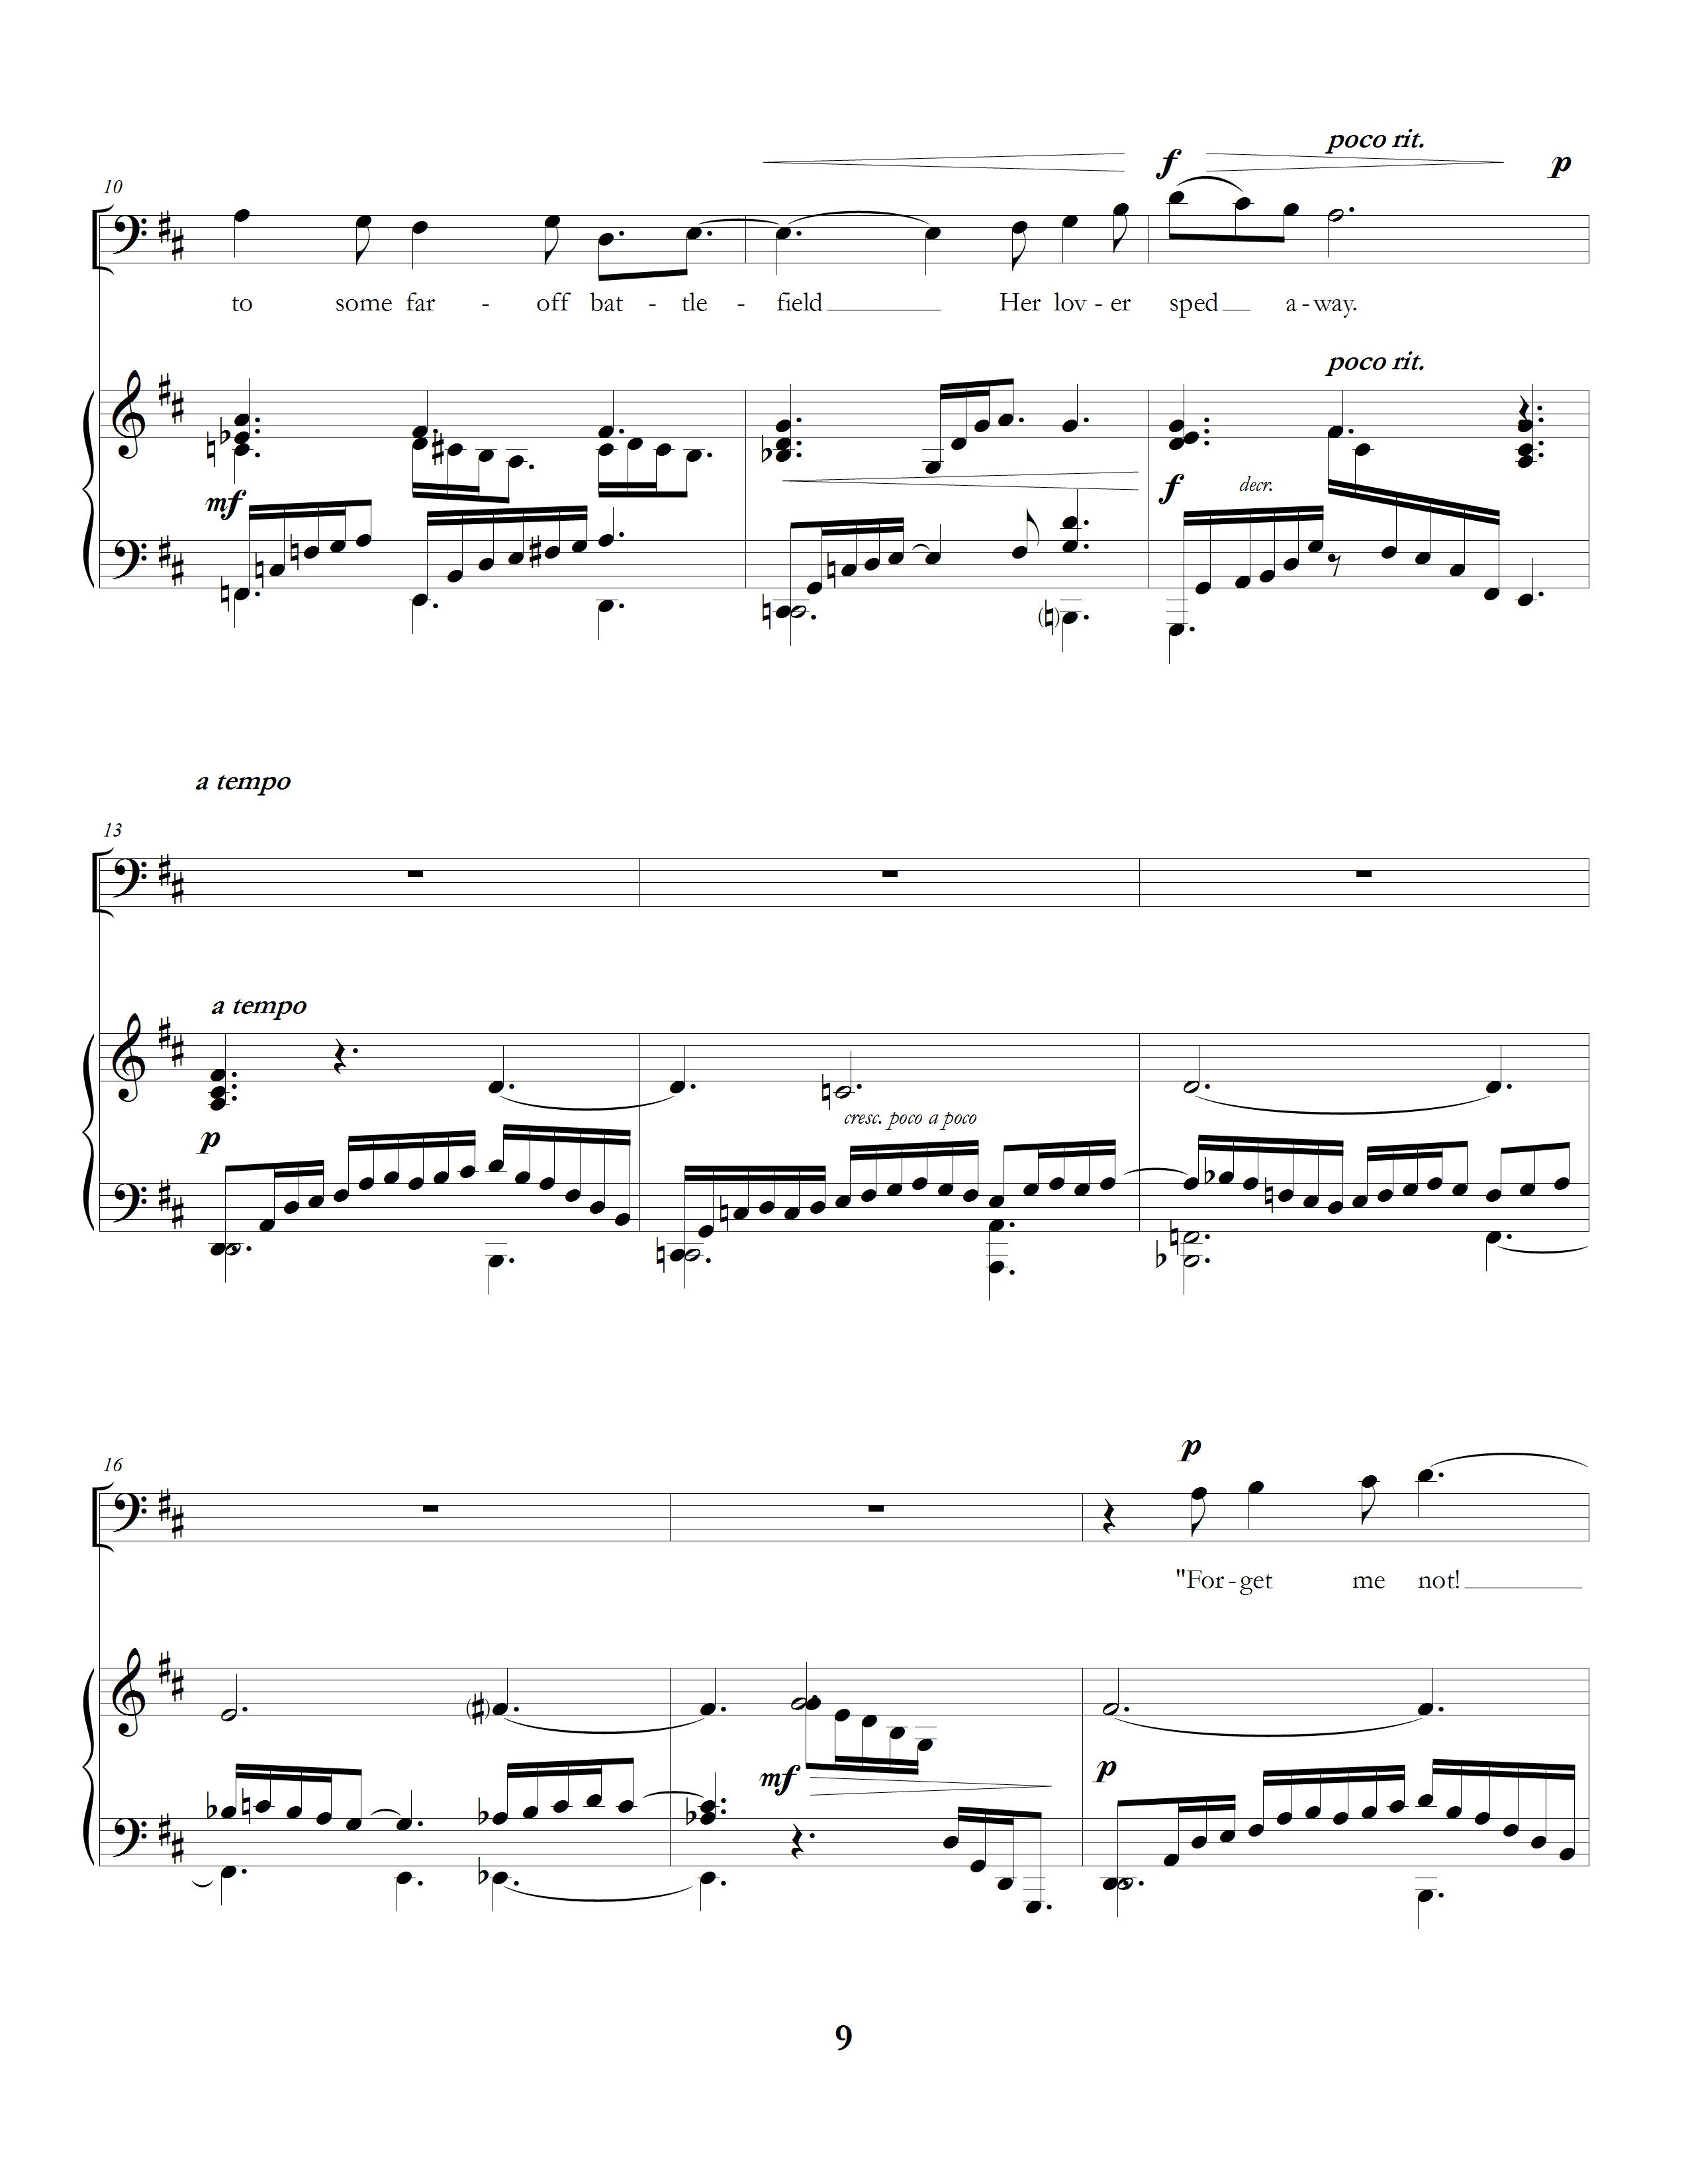 "The Long Hours: Five Rossetti Art Songs", movement three, page two